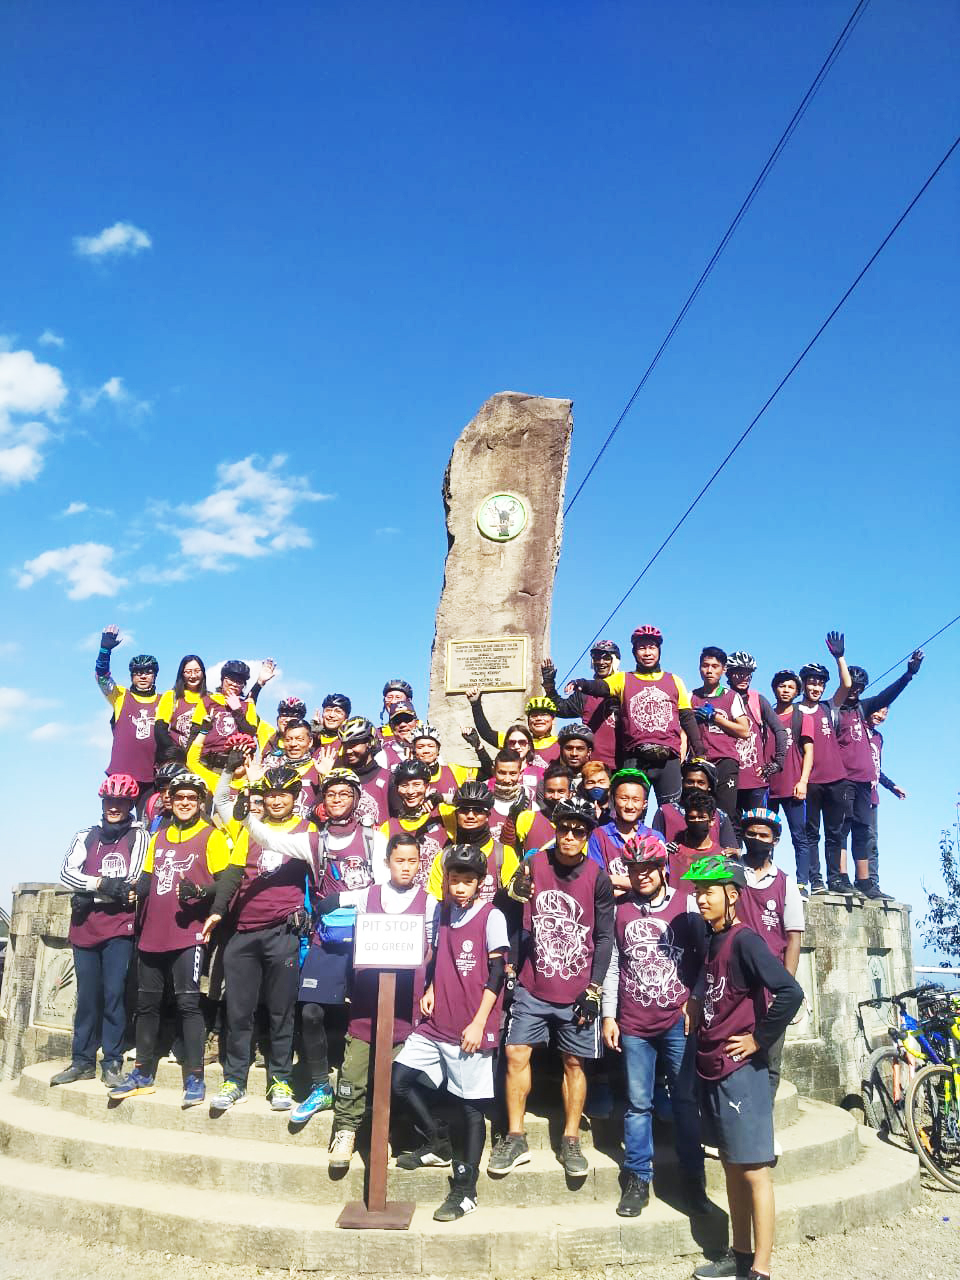 8th Annual Hornbill Cycle ‘rallies’ to Go-green